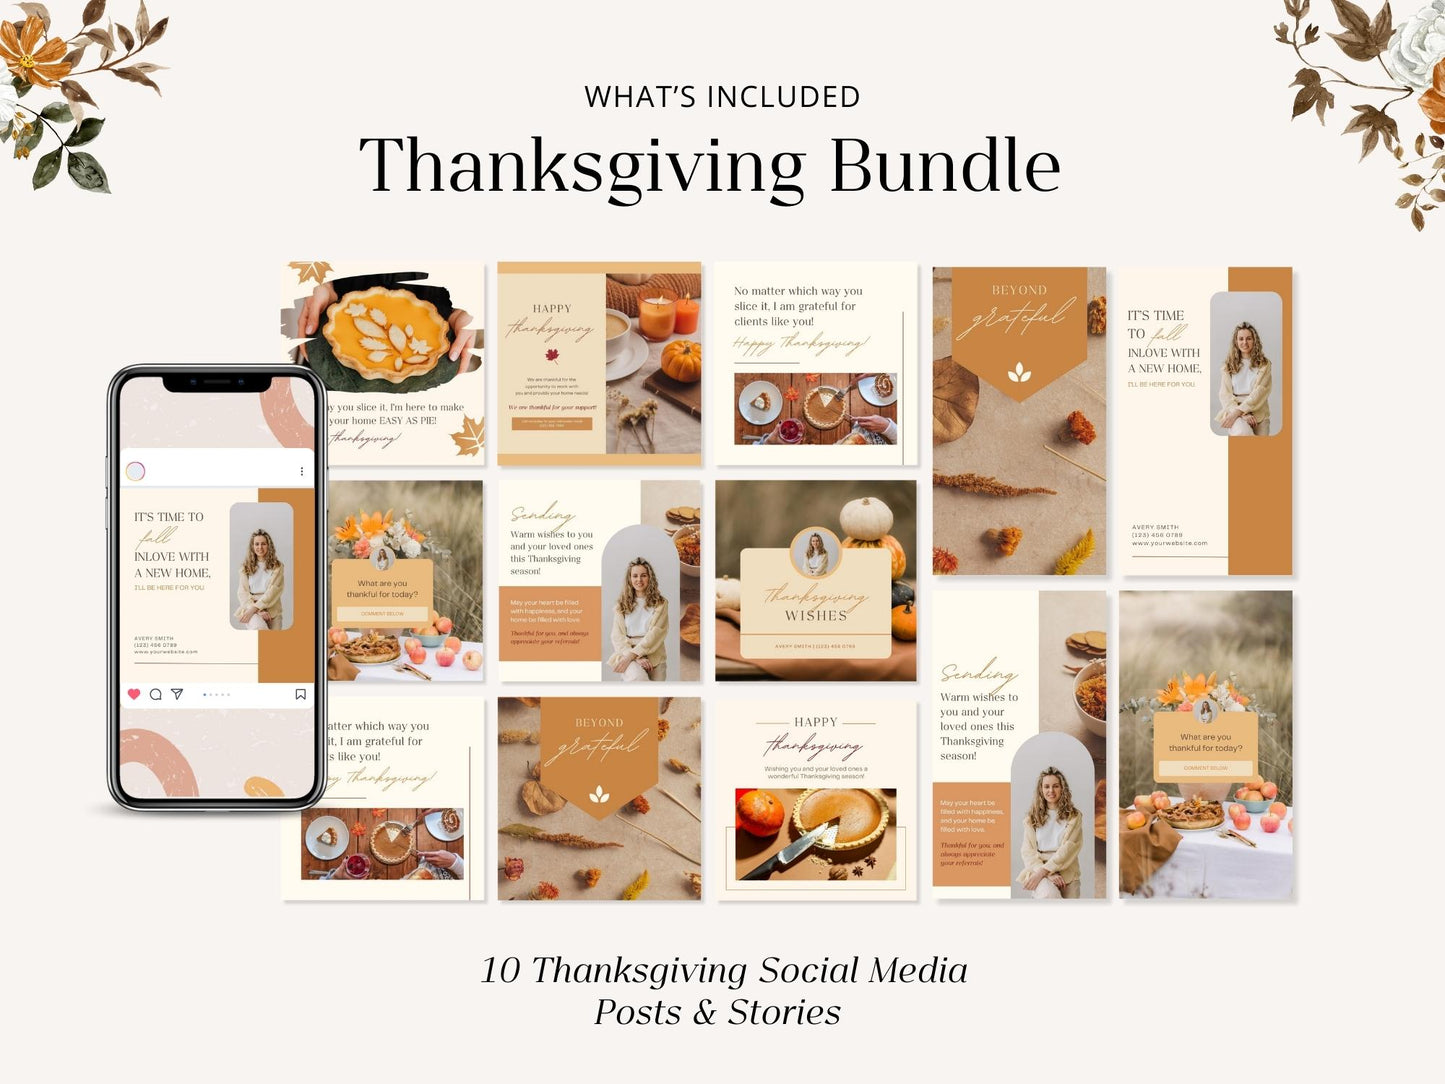 Real Estate Thanksgiving Bundle - Comprehensive collection of eye-catching designs for expressing gratitude and boosting your real estate marketing this Thanksgiving.